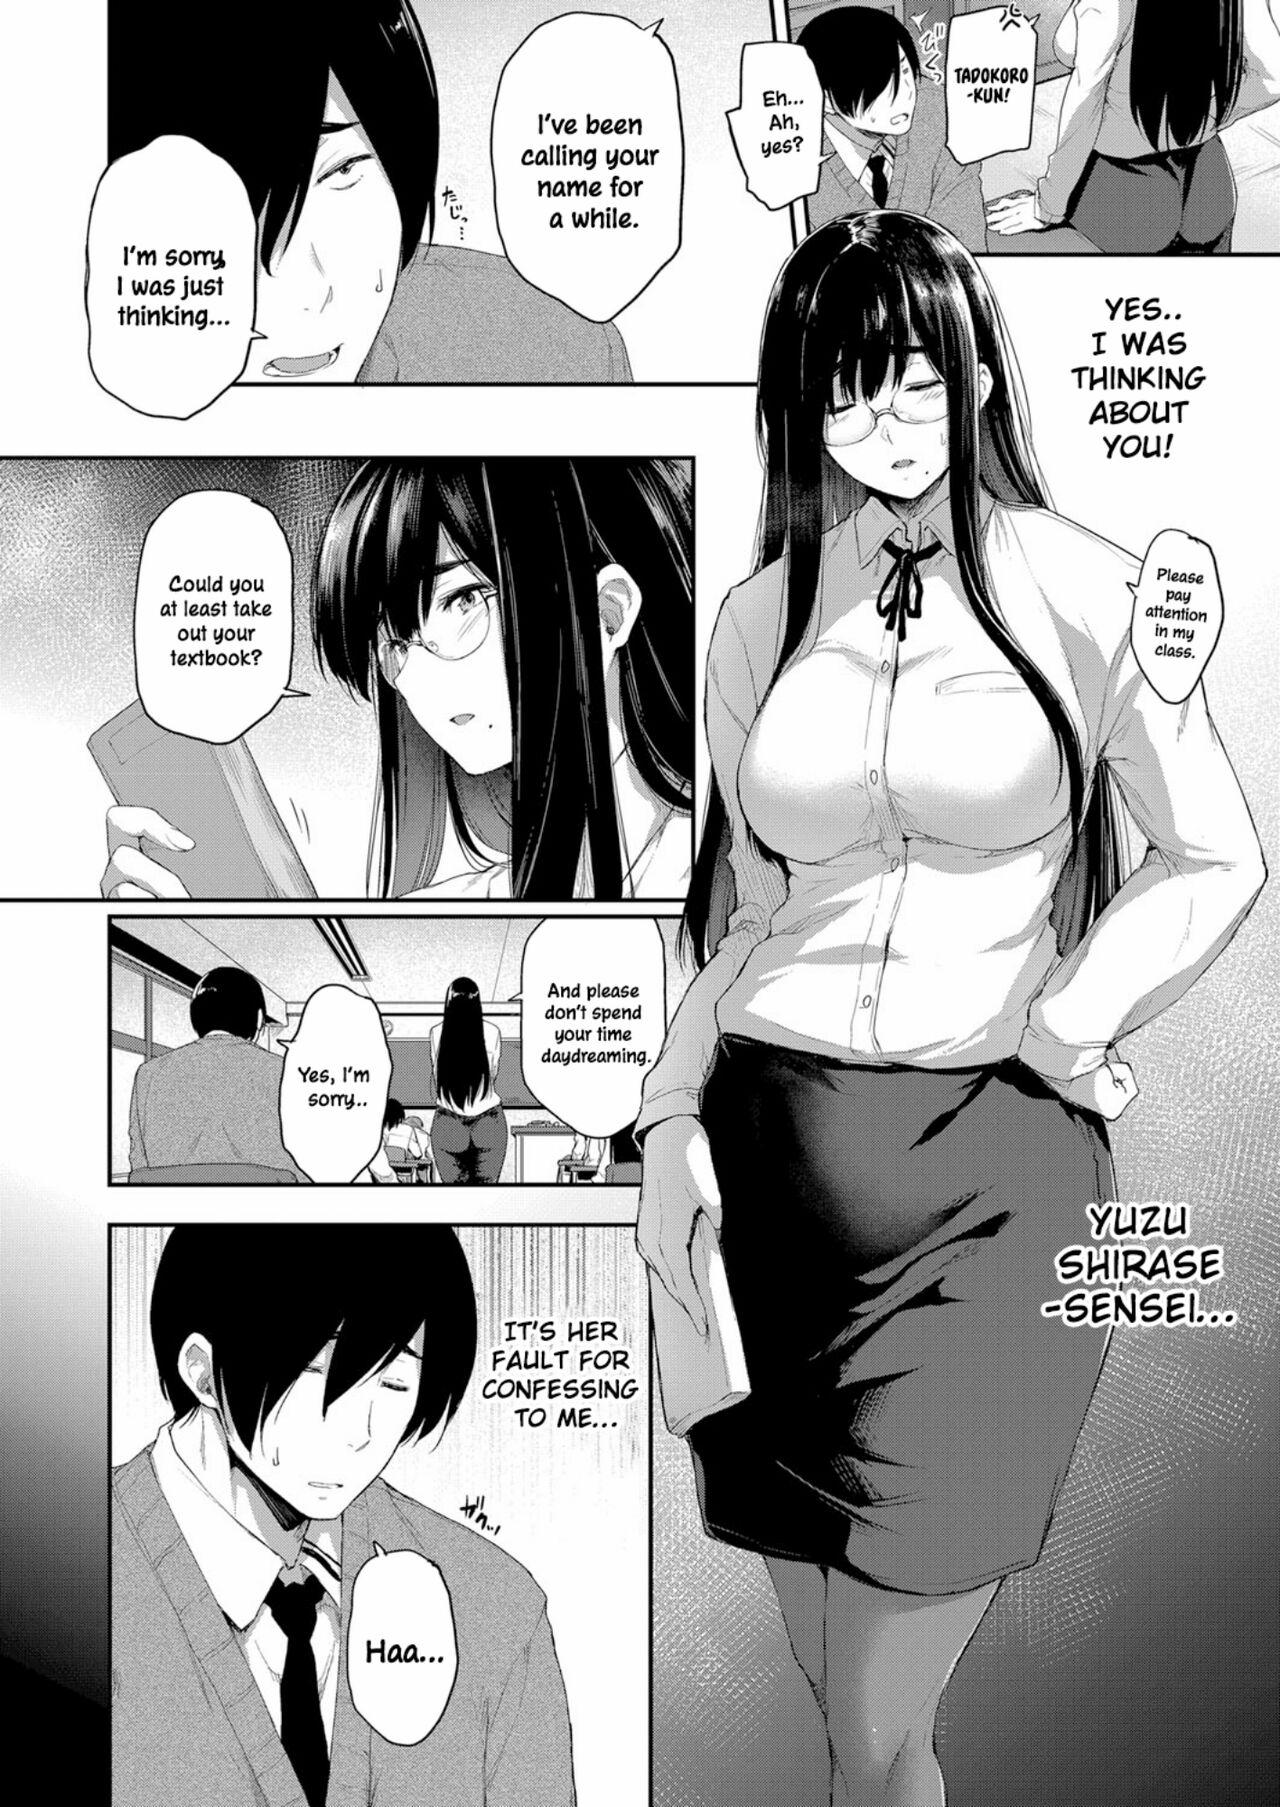 Best Blowjob Kyoushi datte Tsukiaitai | Even a Teacher Wants to Date Leite - Page 4